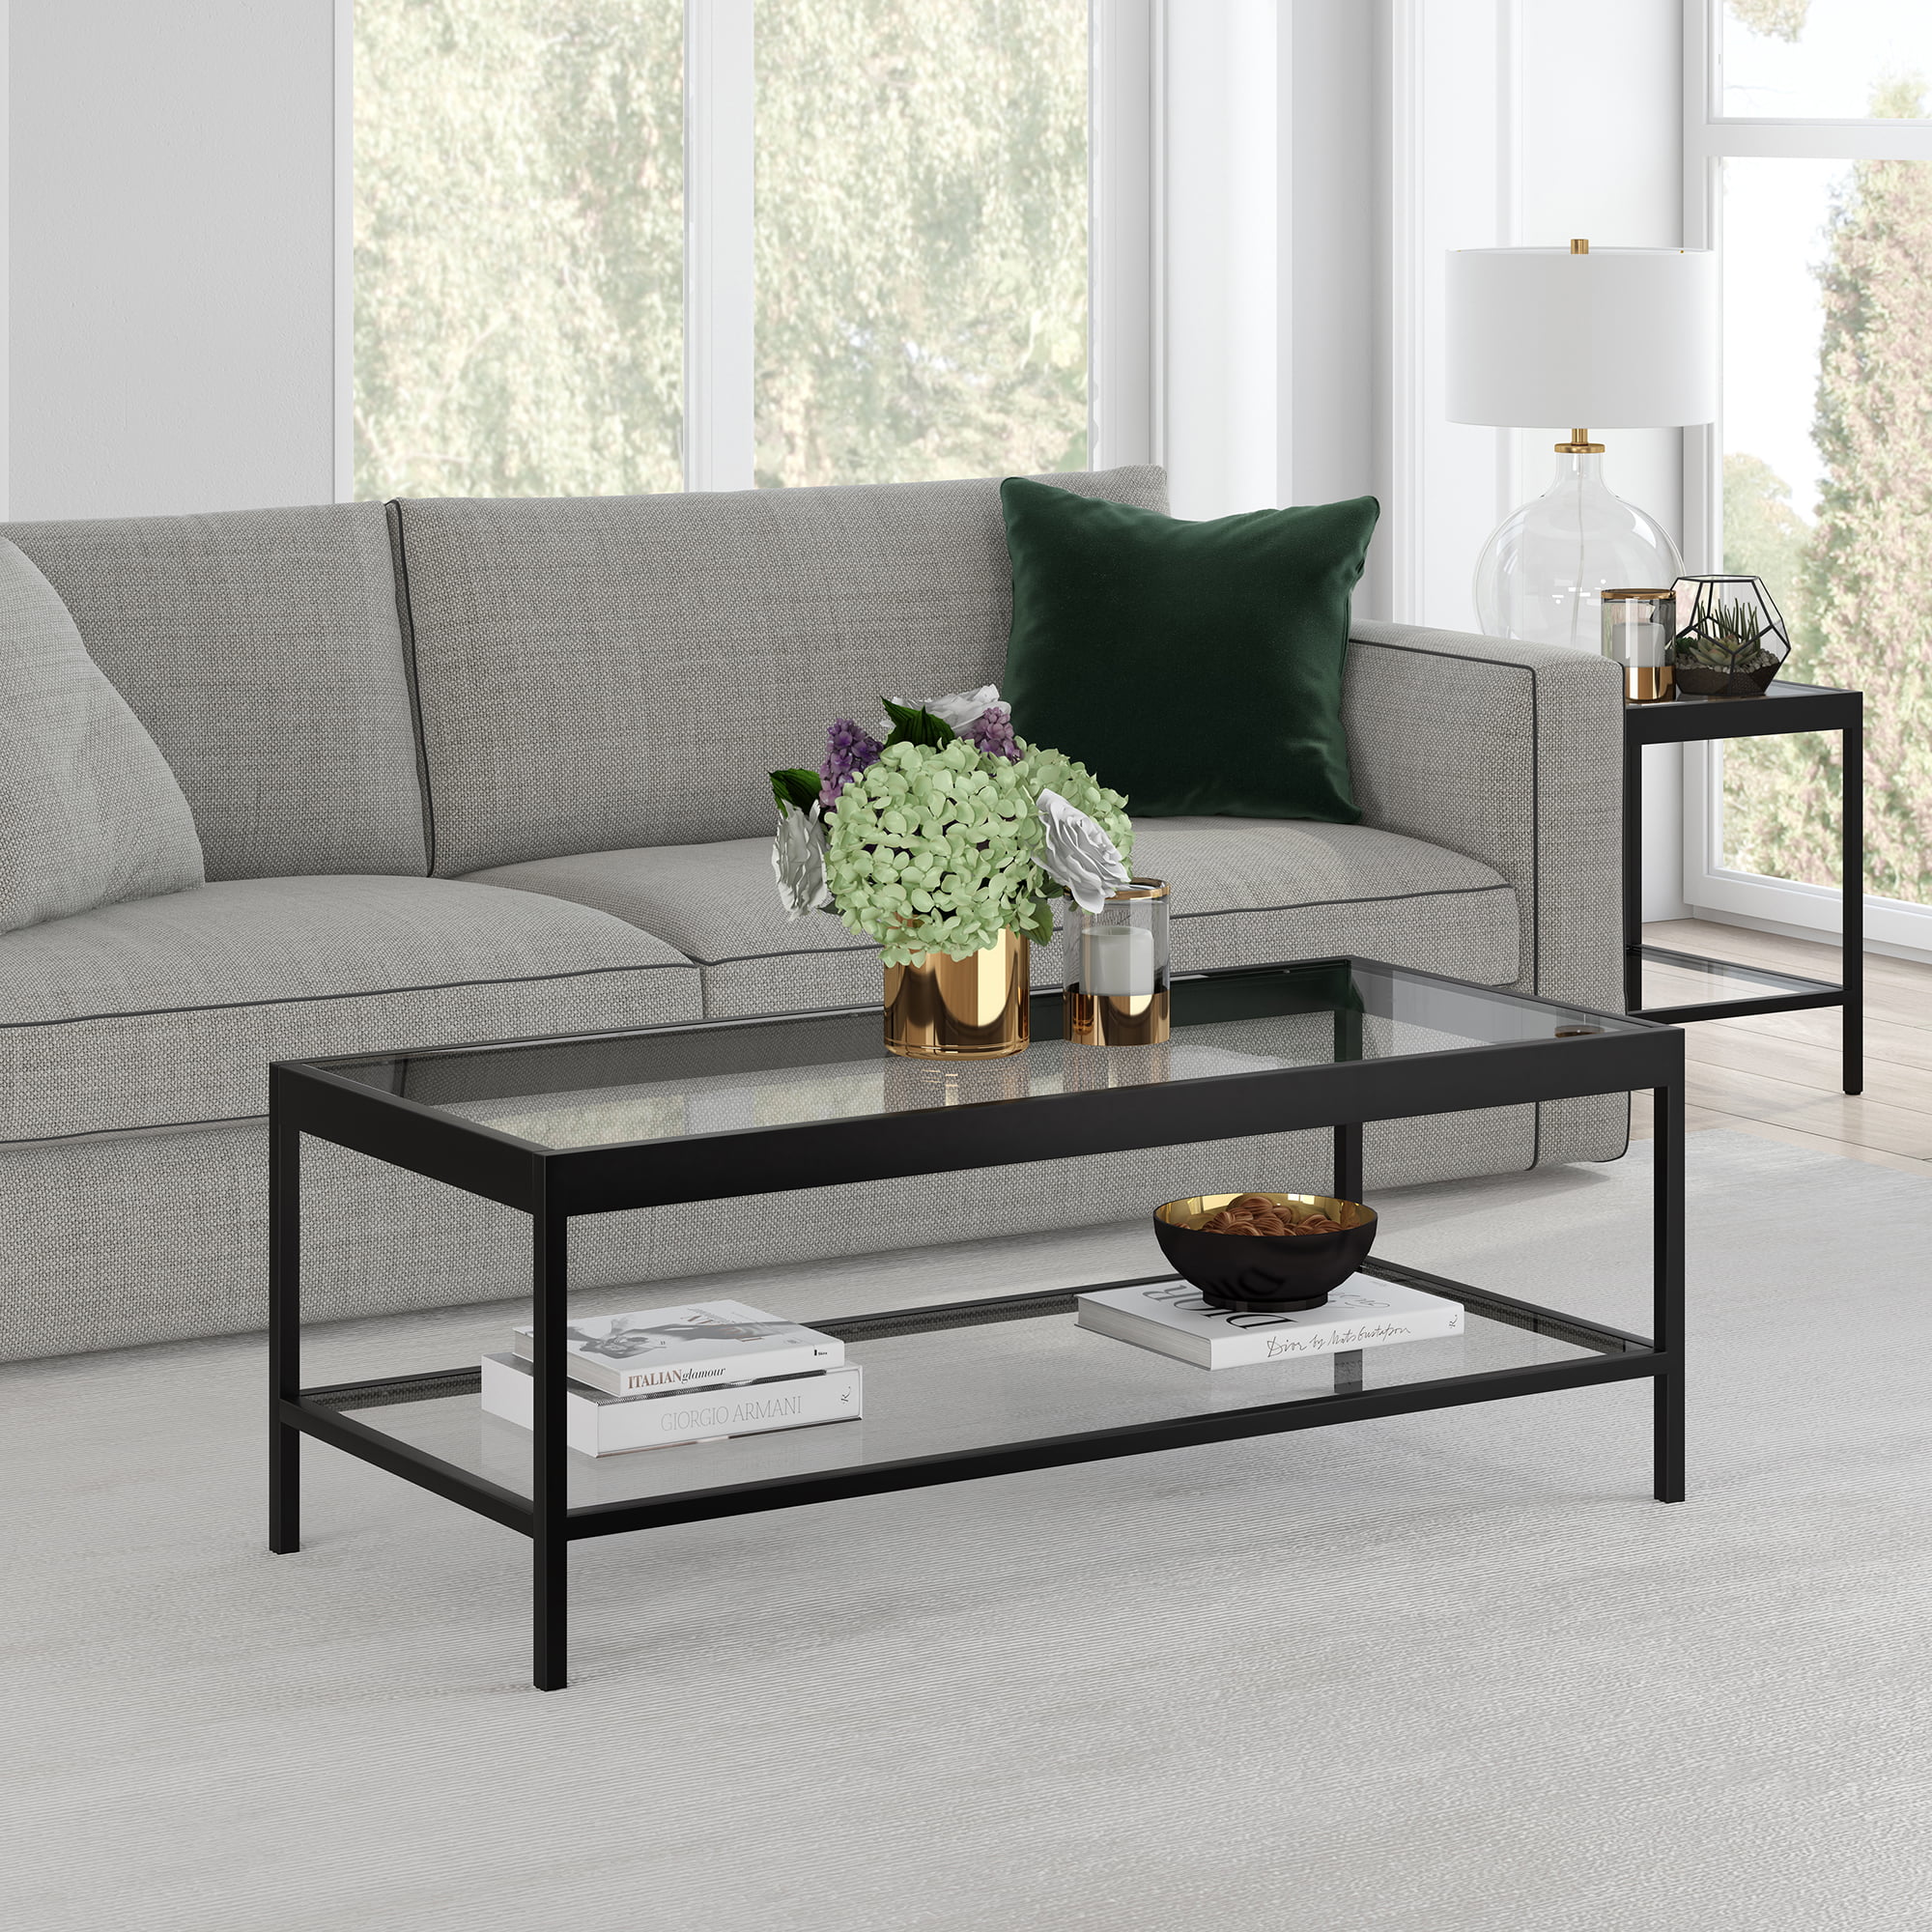 Modern Coffee Table with Open Shelf, Rectangular Table for Living Room